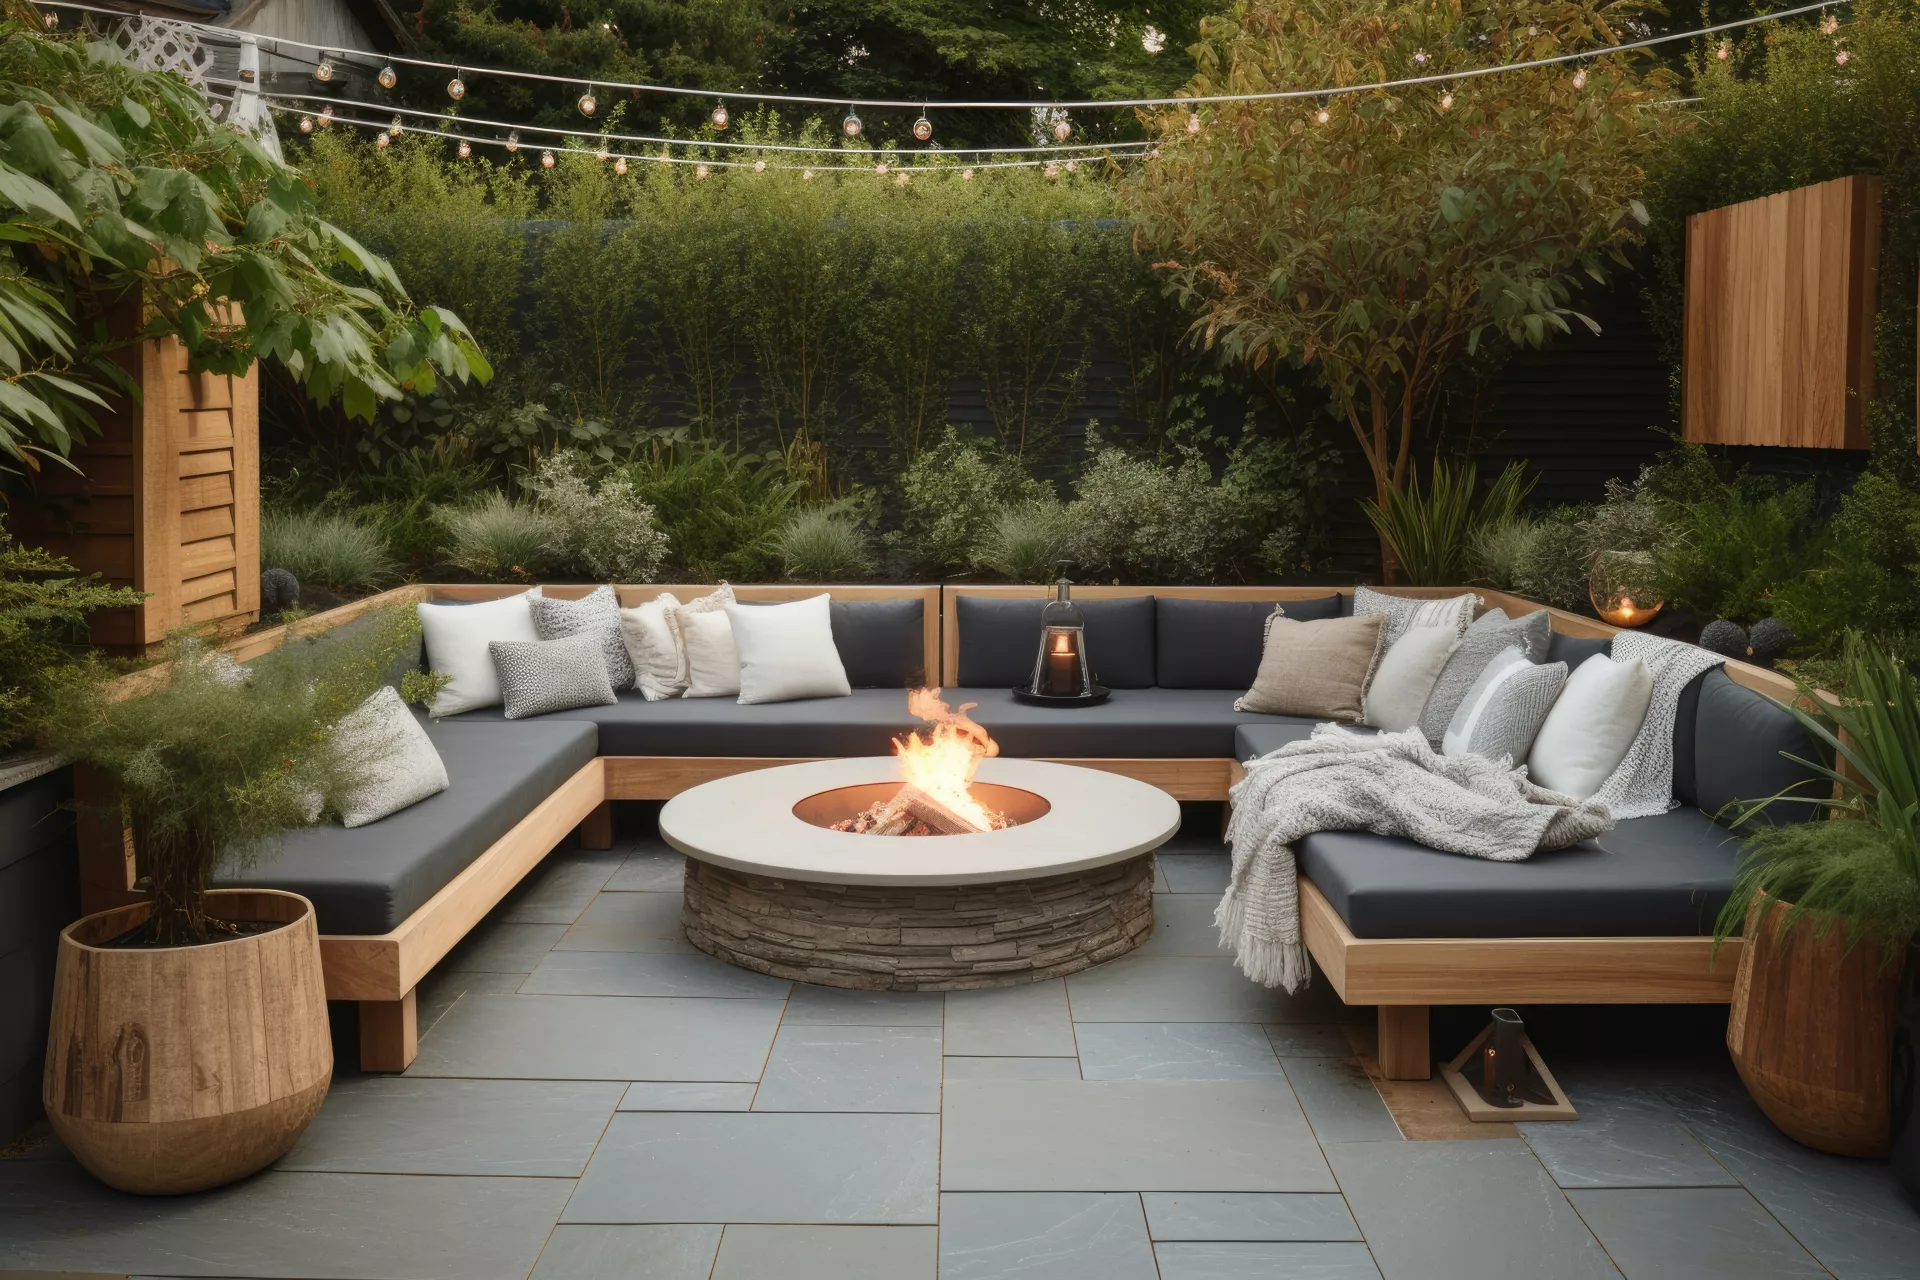 Types Of Tiles For Outdoor Patios: The Ultimate Guide To Choosing The Best One